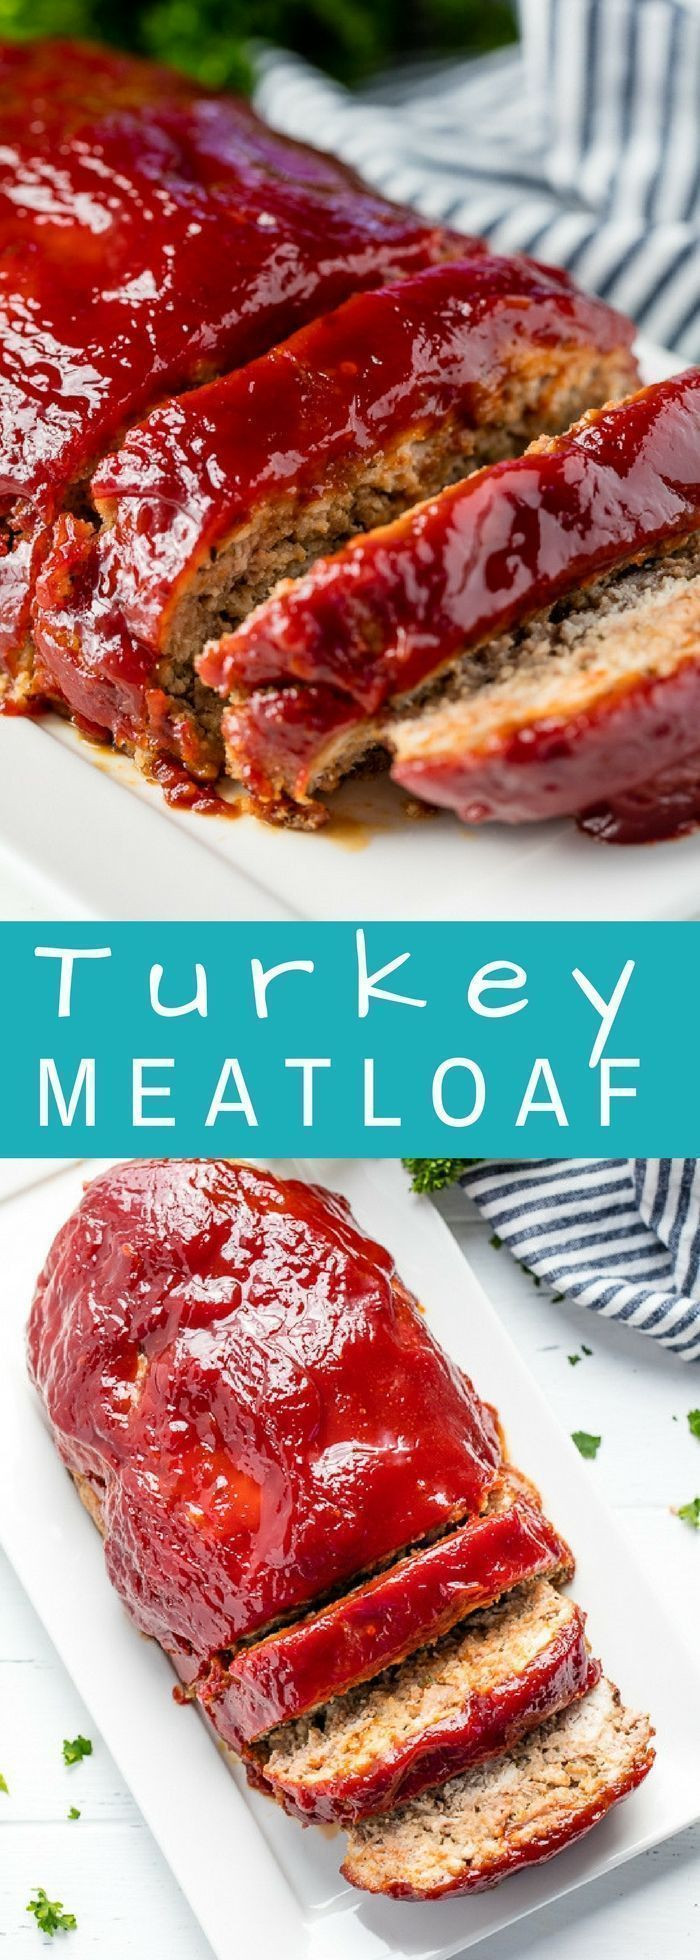 Easy Healthy Meatloaf Recipe
 Best 25 Meatloaf recipes ideas on Pinterest